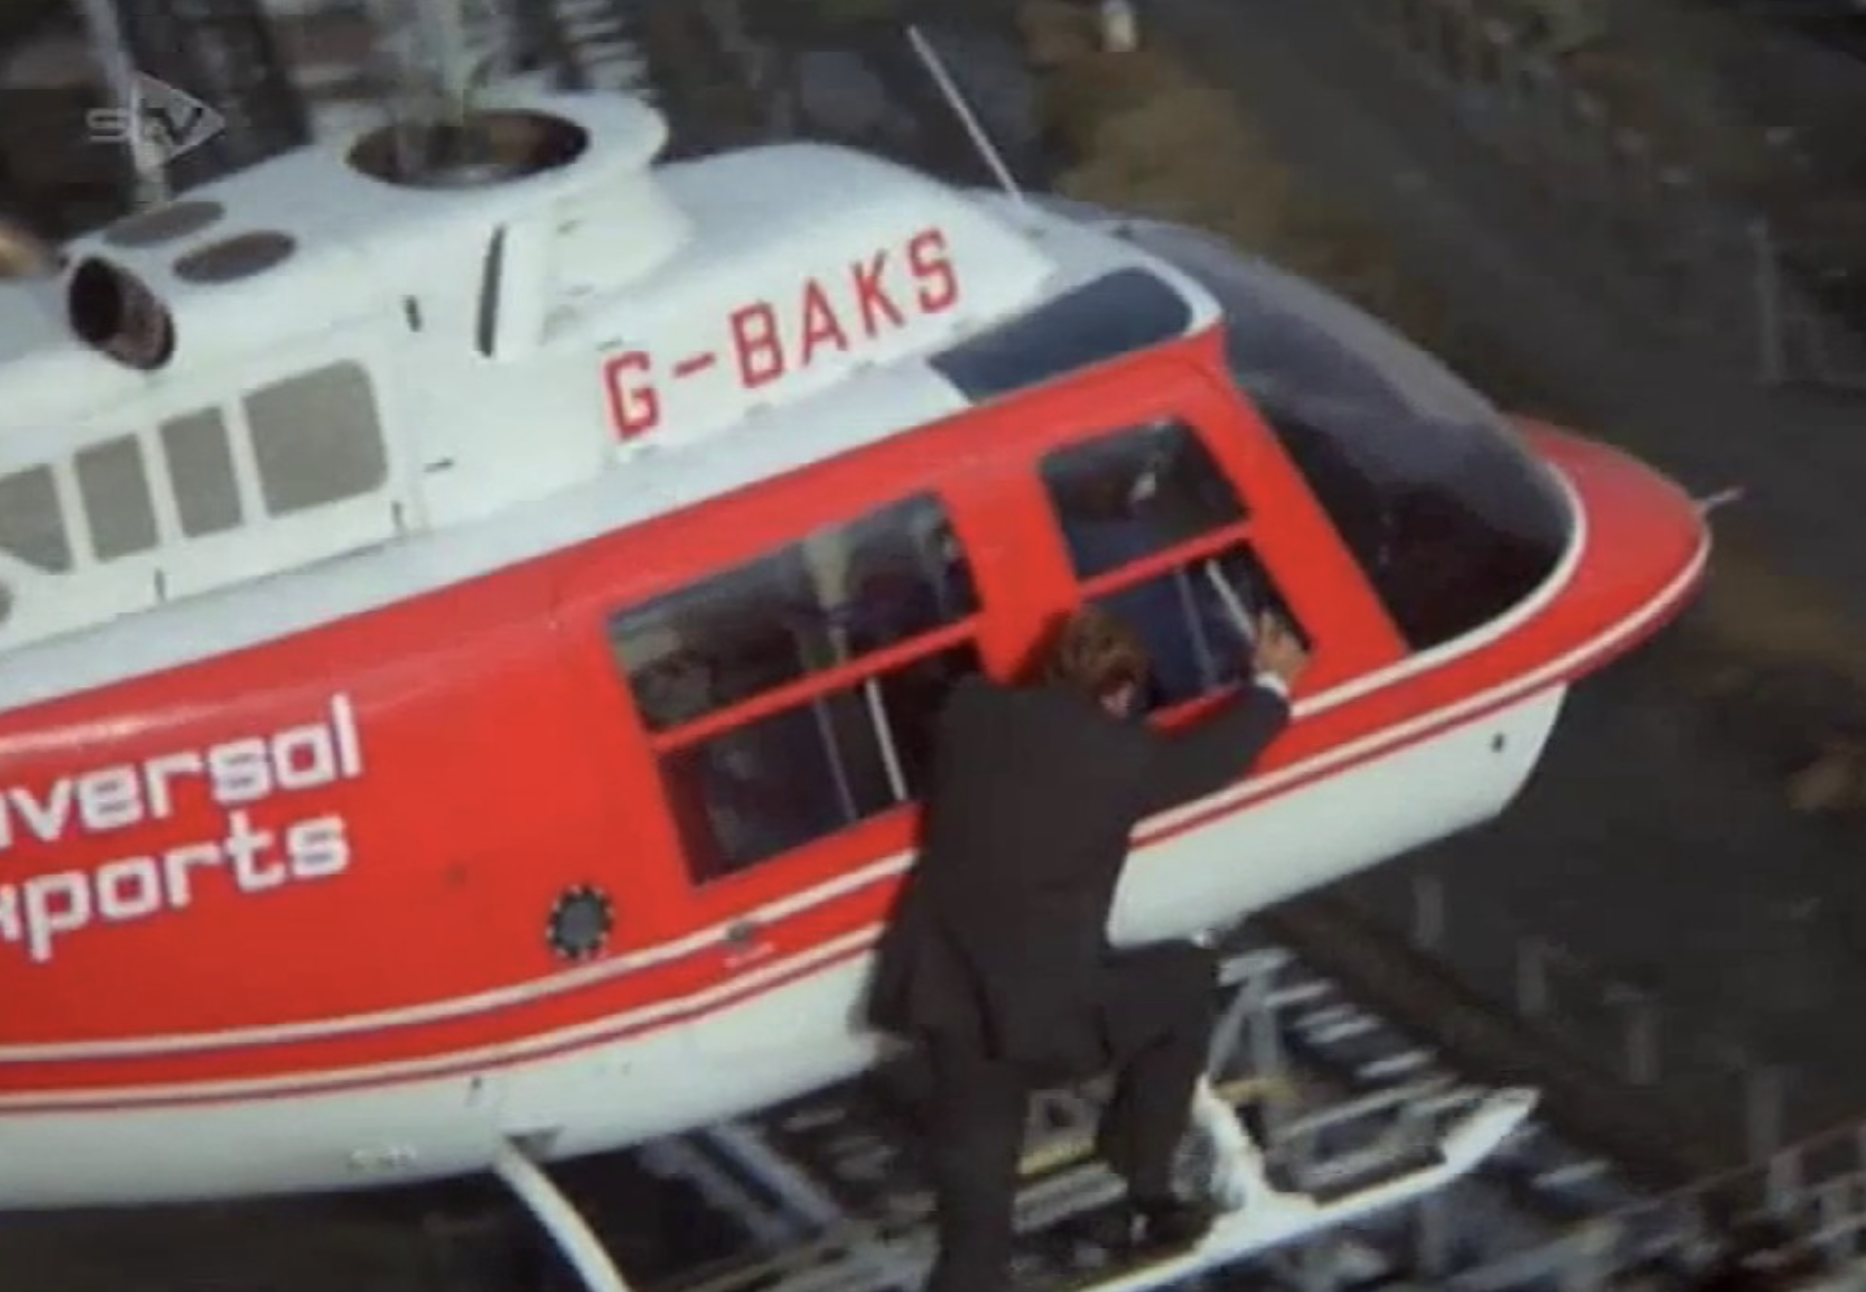 “Check out the cold open of the Bond film 'For Your Eyes Only.' It has some absolutely insane helicopter stunts, with it straight up chasing people, flying through buildings. Four years later the tragic helicopter accident on The Twilight Zone movie happened and wisely helicopter safety on set has been majorily improved. Doubt you'll see another production do something that crazy again.”